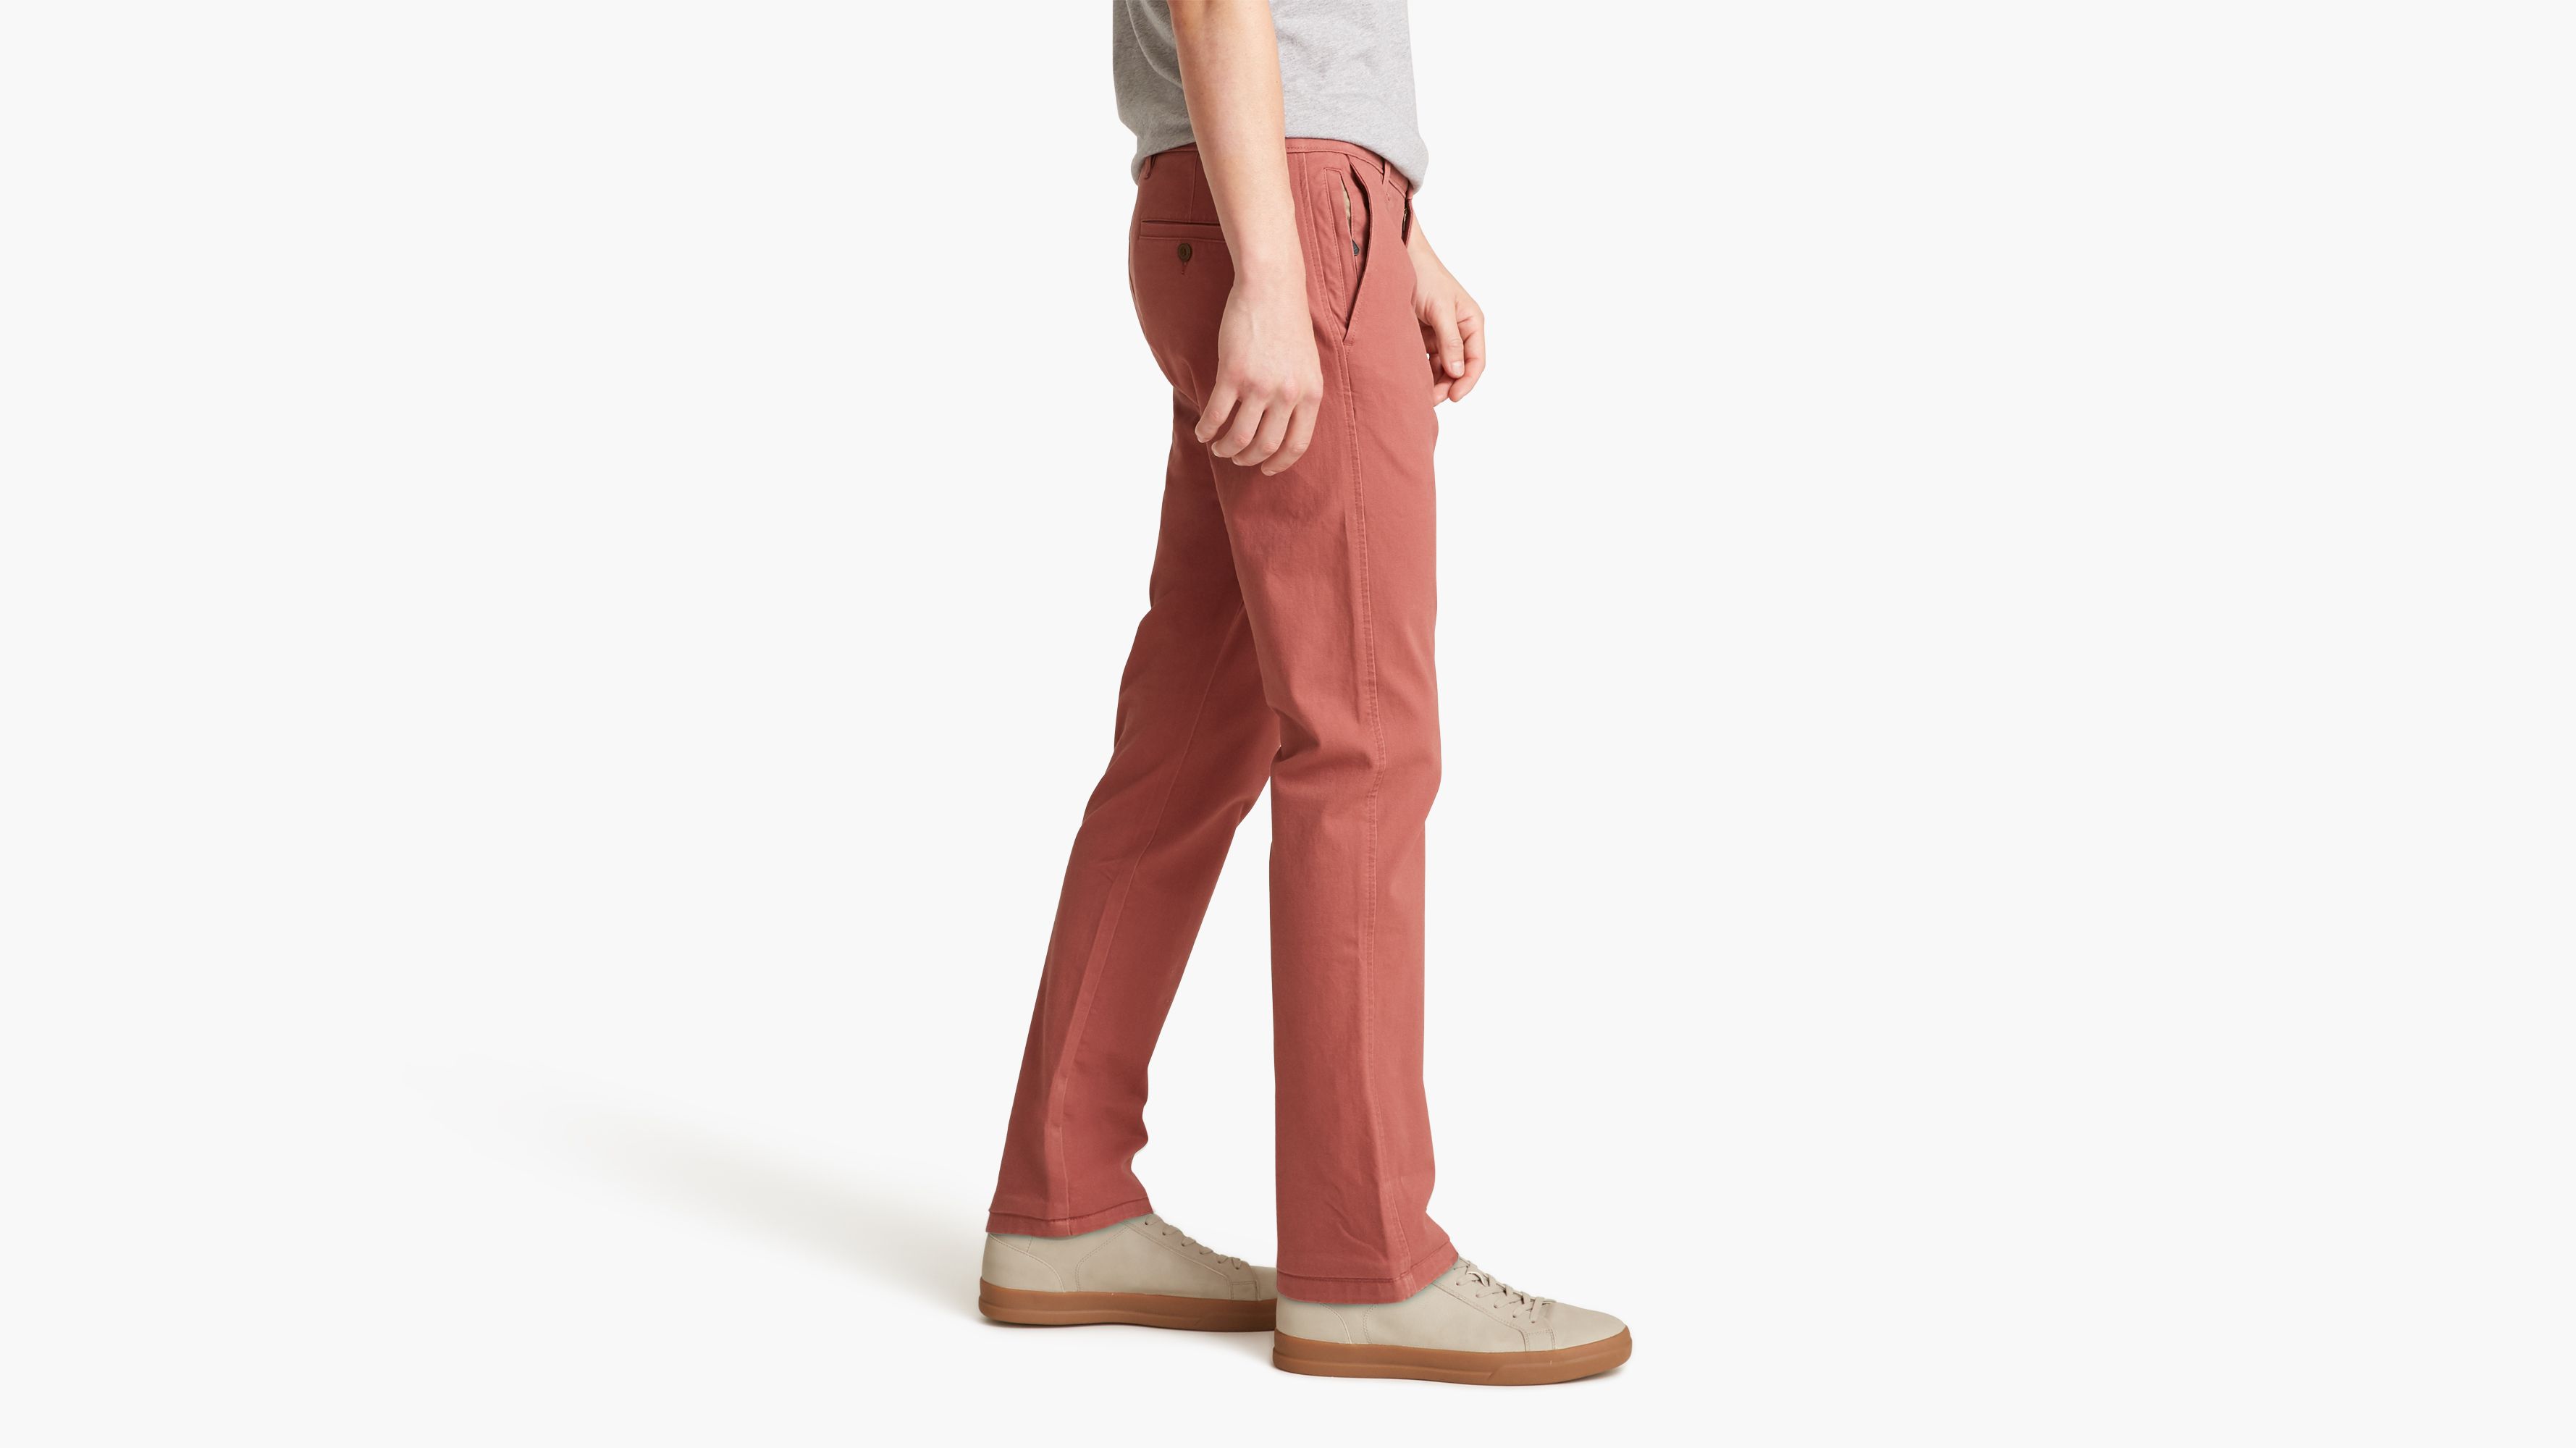 big and tall red pants